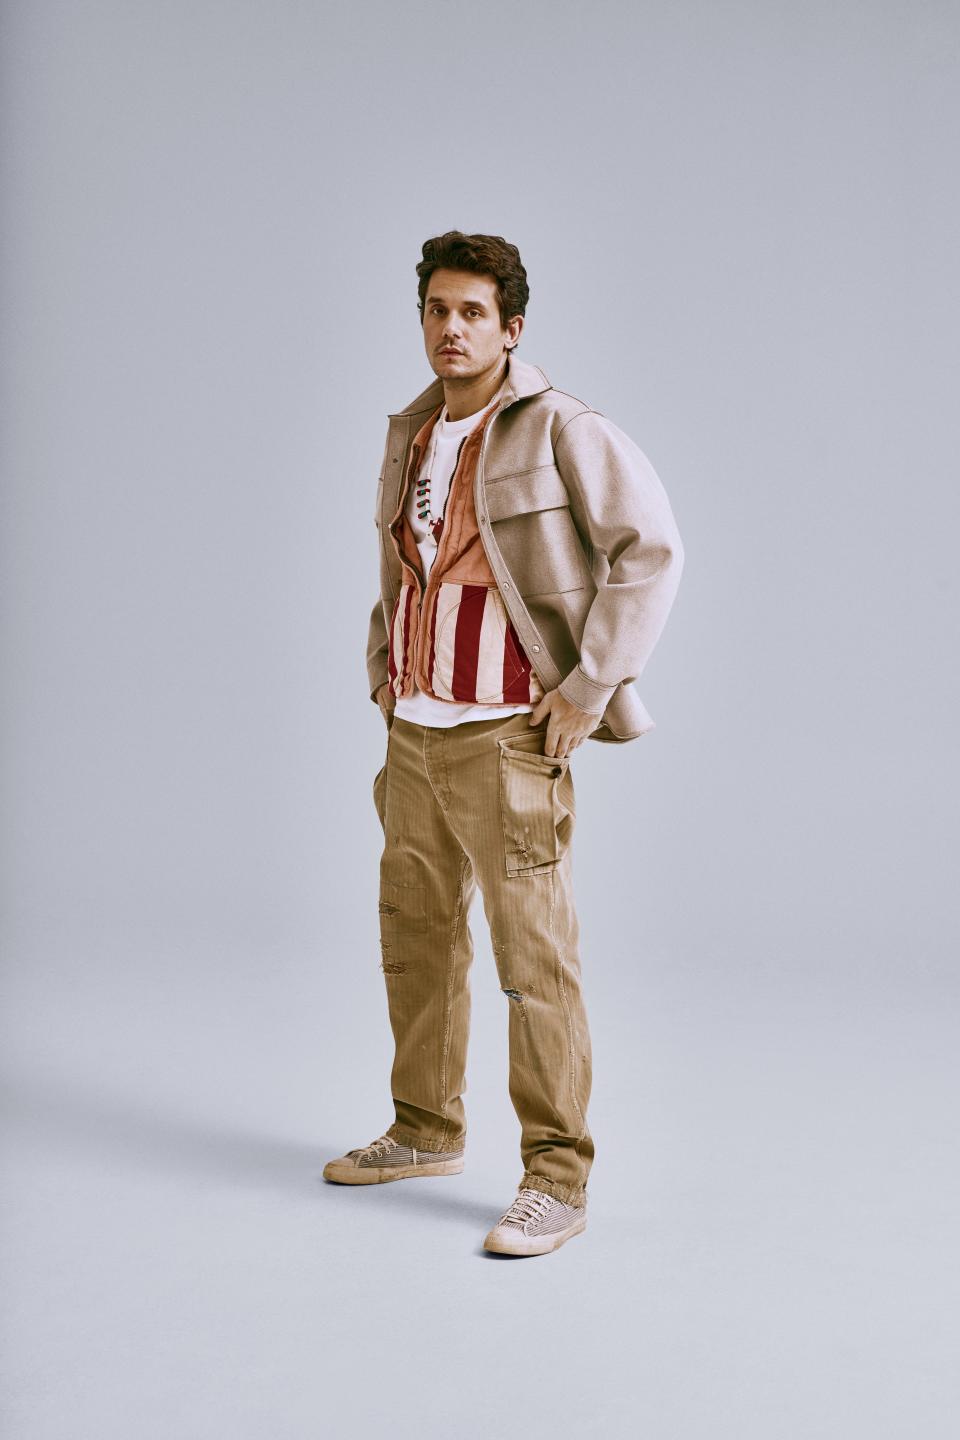 <cite class="credit">Ultrasuede shirt jacket, by Fear of God / Vest (S/S '19), Sublig crew tee, Veterans pants (2019), and Jaipur Hi-Hickory sneakers (2009), by Visvim / Necklace, by Kapital</cite>